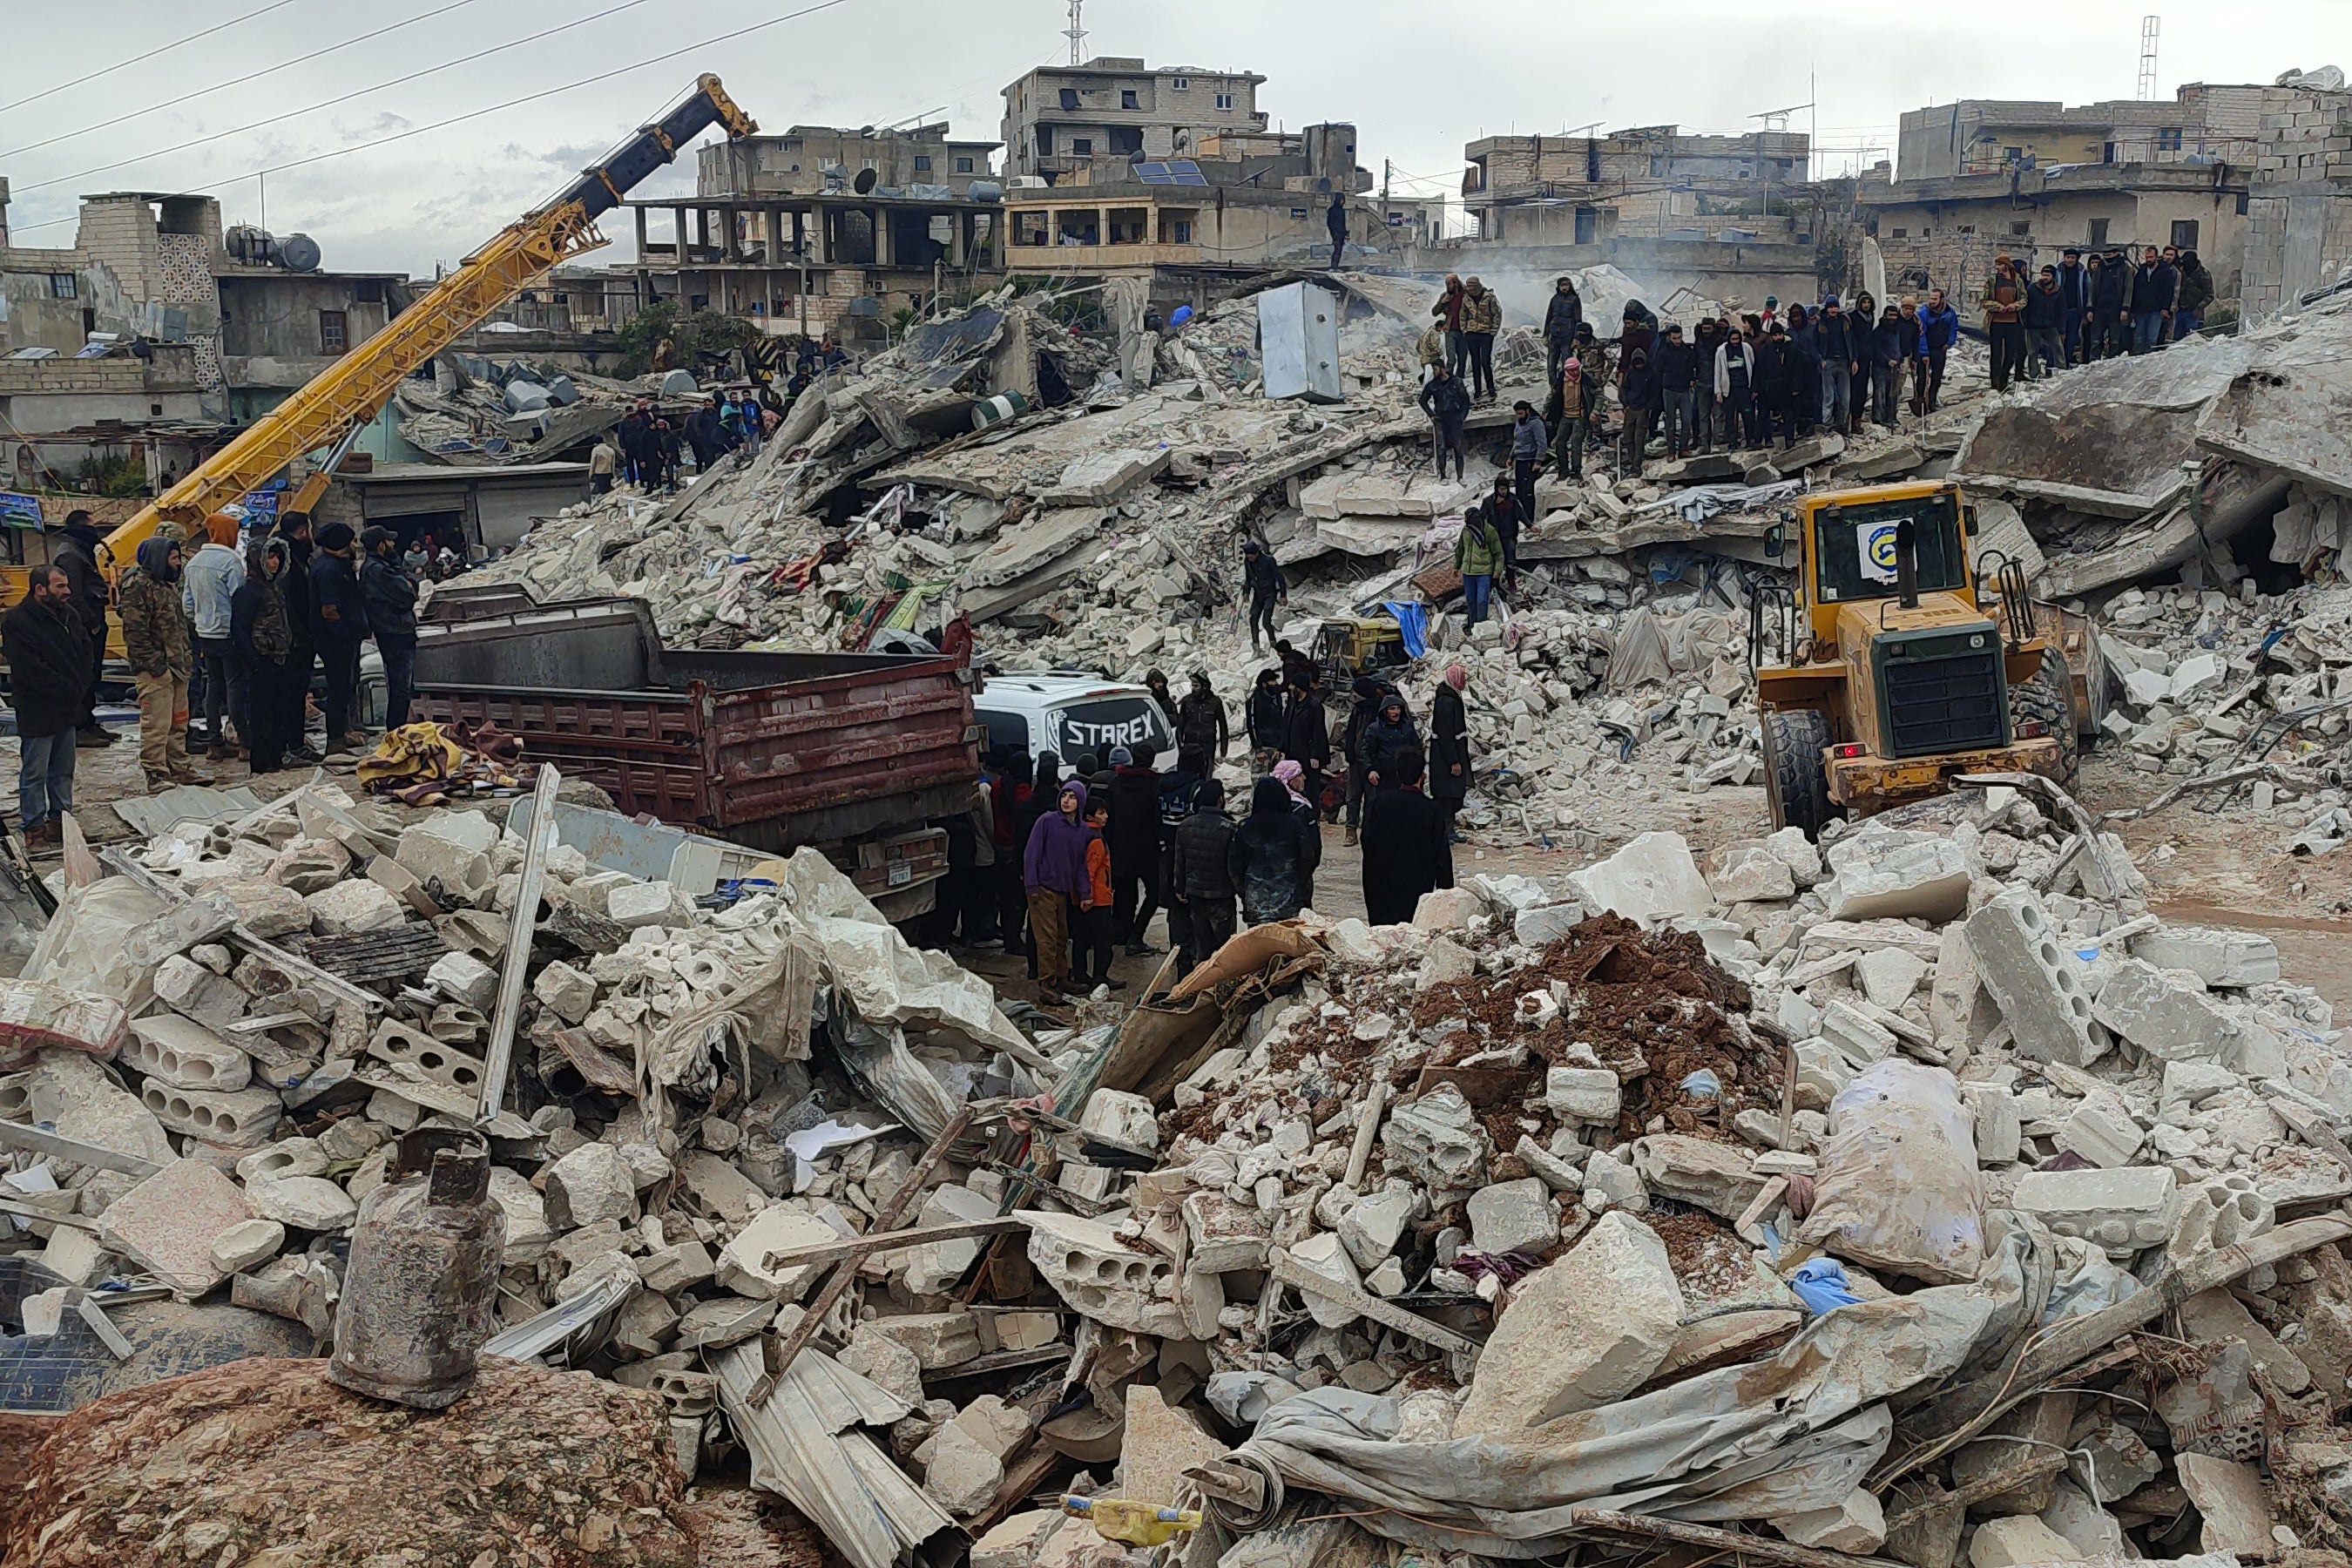 Search and rescue teams continue their work at the collapsed buildings, in Idlib, Syria